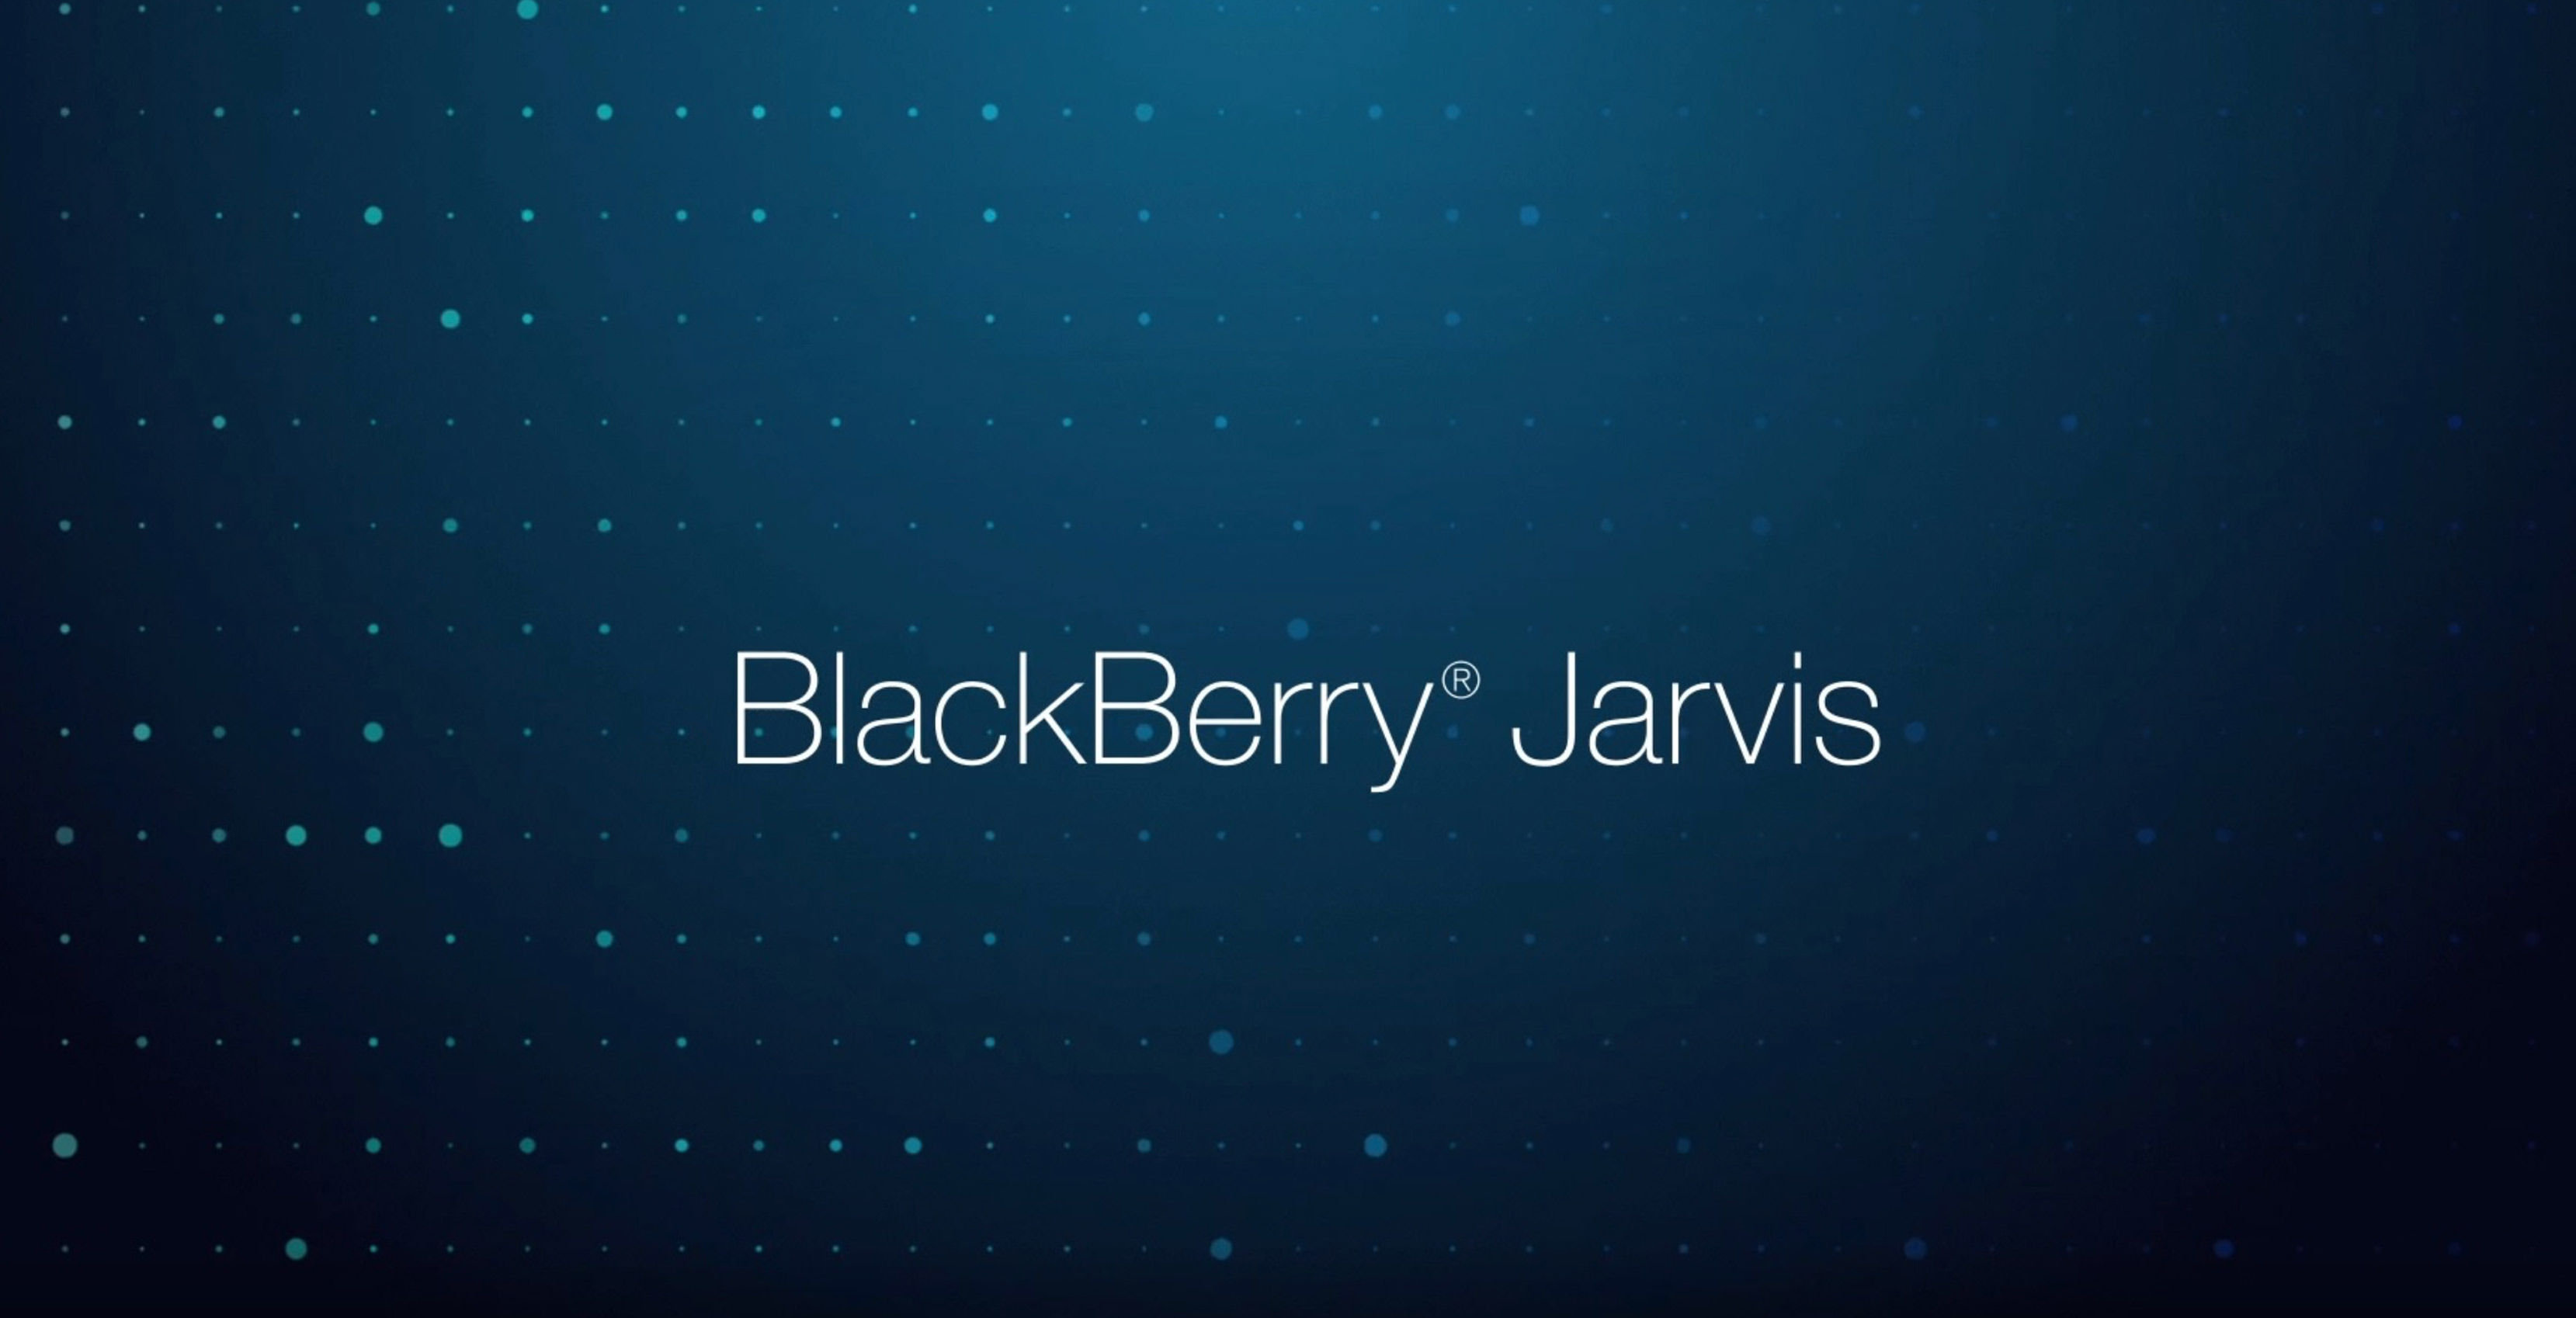 Jarvis is BlackBerry's new automotive security software